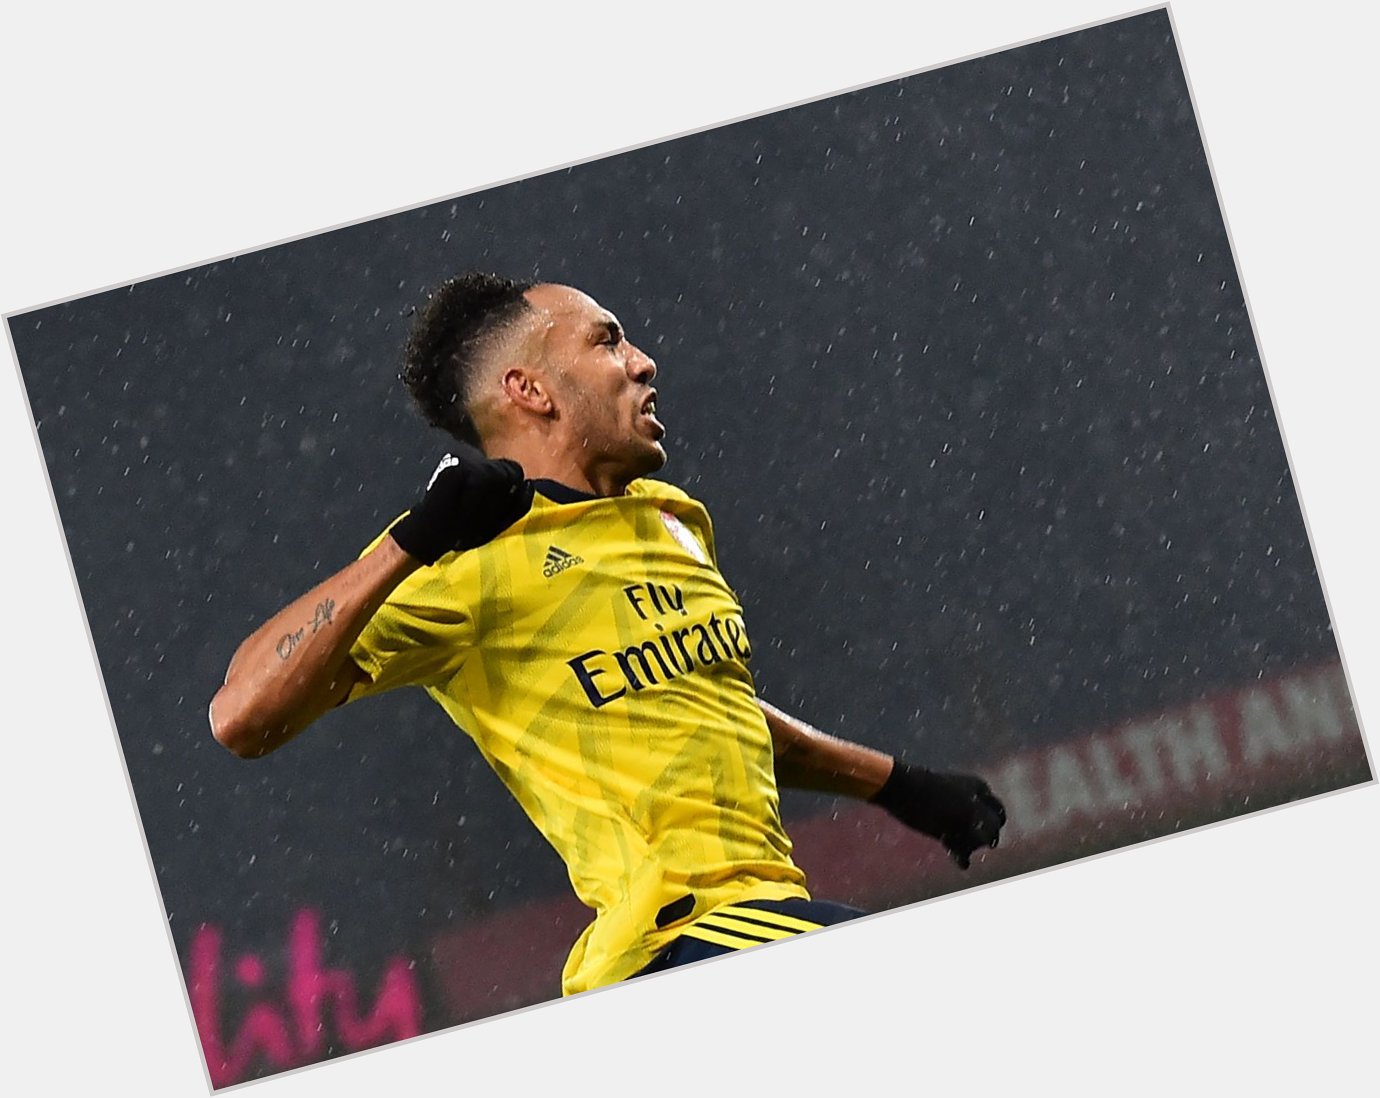 Also, a big Happy 32nd Birthday to our club captain and main man, Pierre-Emerick Aubameyang!   